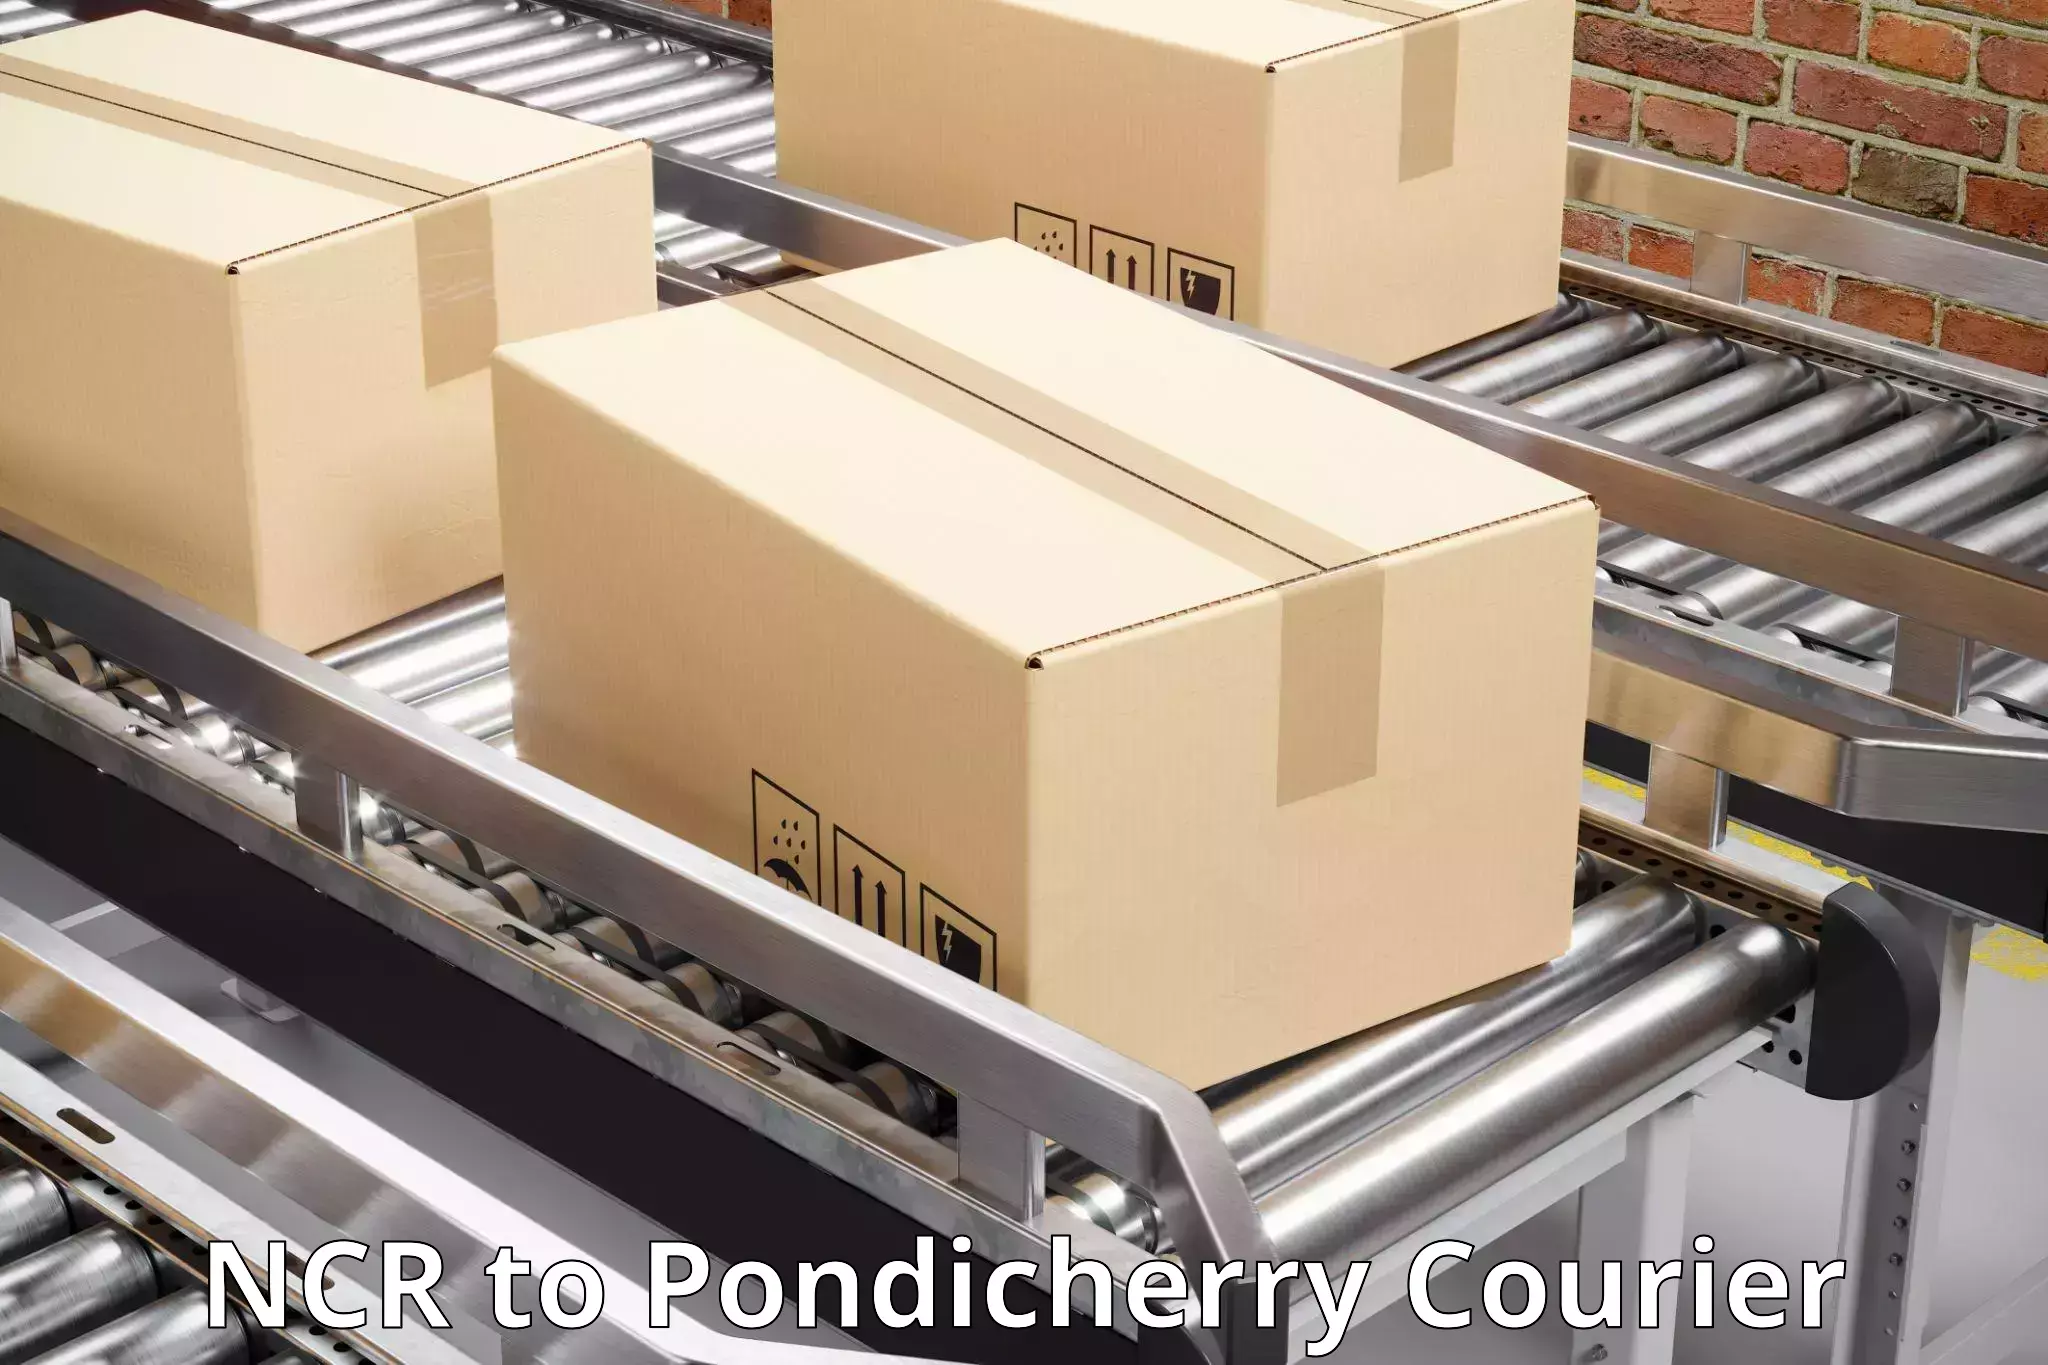 High-priority parcel service NCR to Pondicherry